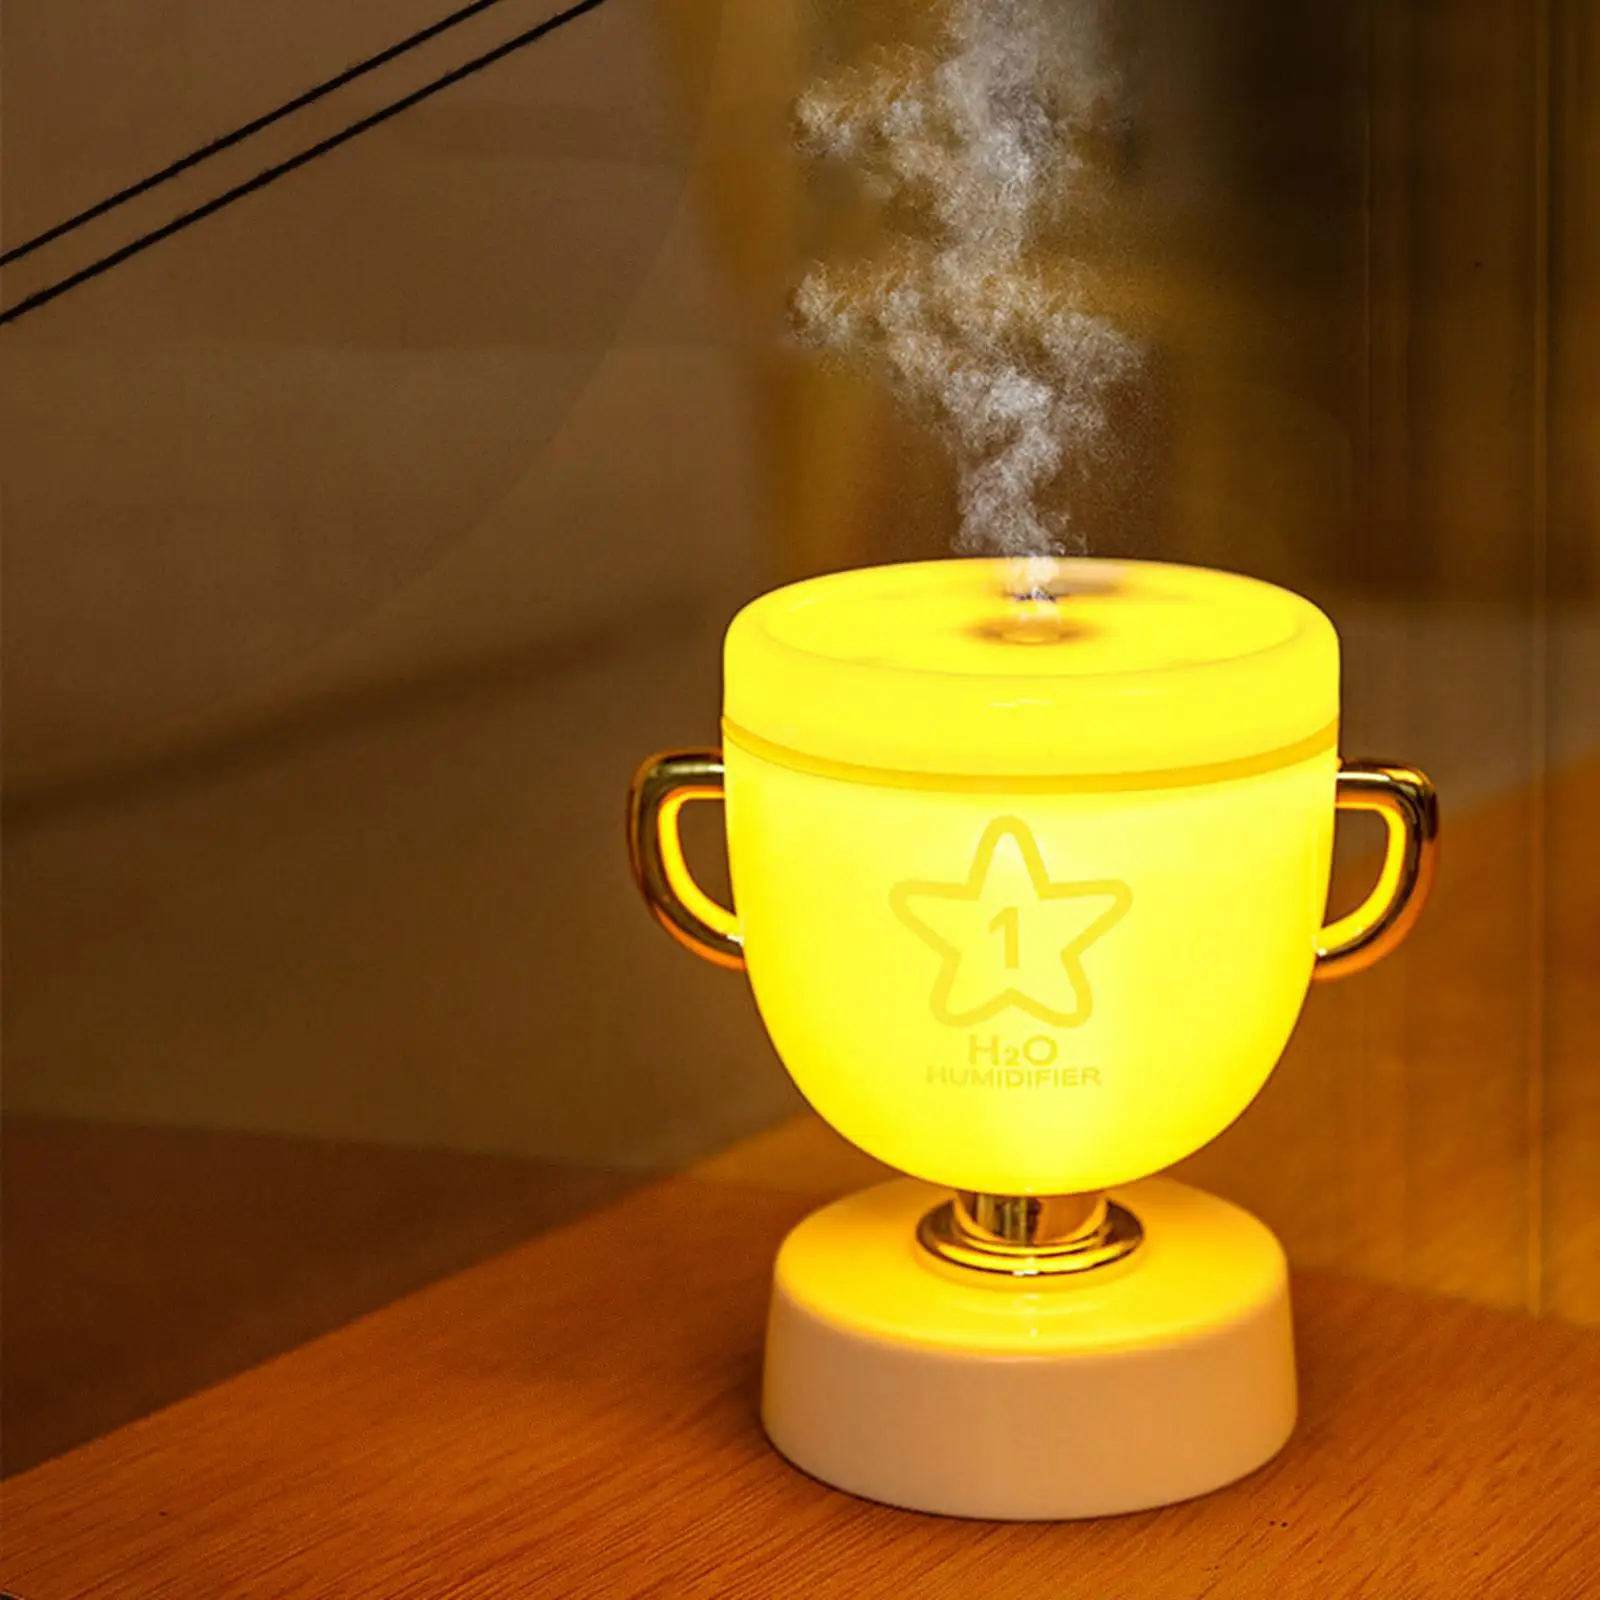 Portable Air Humidifier Night Light Desk Quiet Intelligent Power Off Protection Car USB Air Diffuser for Home